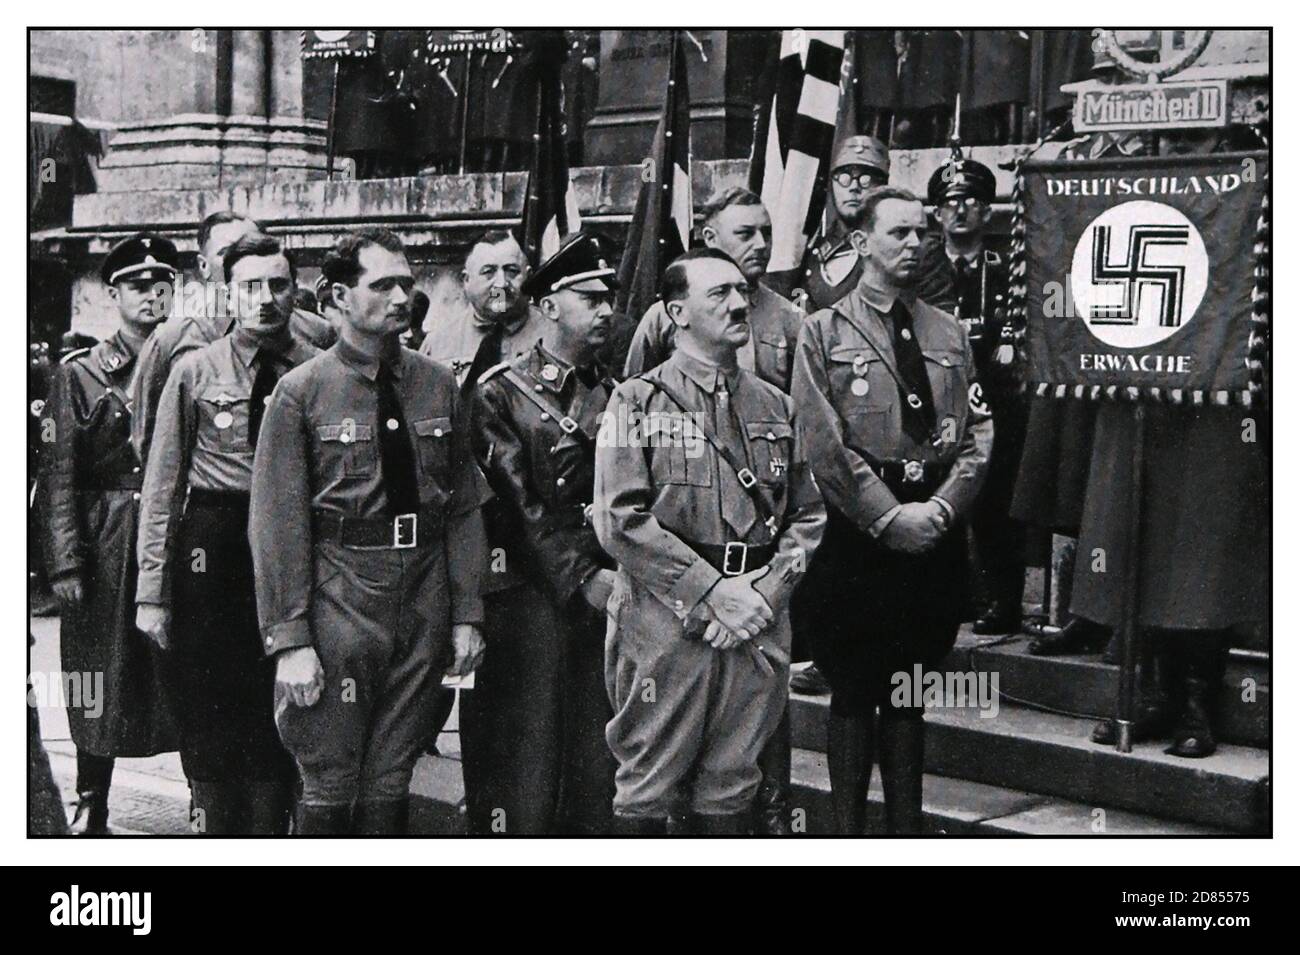 Vintage 1930's Nazi rally march in memory of Nazi victims of Beer Hall Putsch in Munich in 1920's. Adolf Hitler heads the group with Rudolf Hess to his right and Heinrich Himmler behind. Munich rally flag with 'Germany Awake' Stock Photo